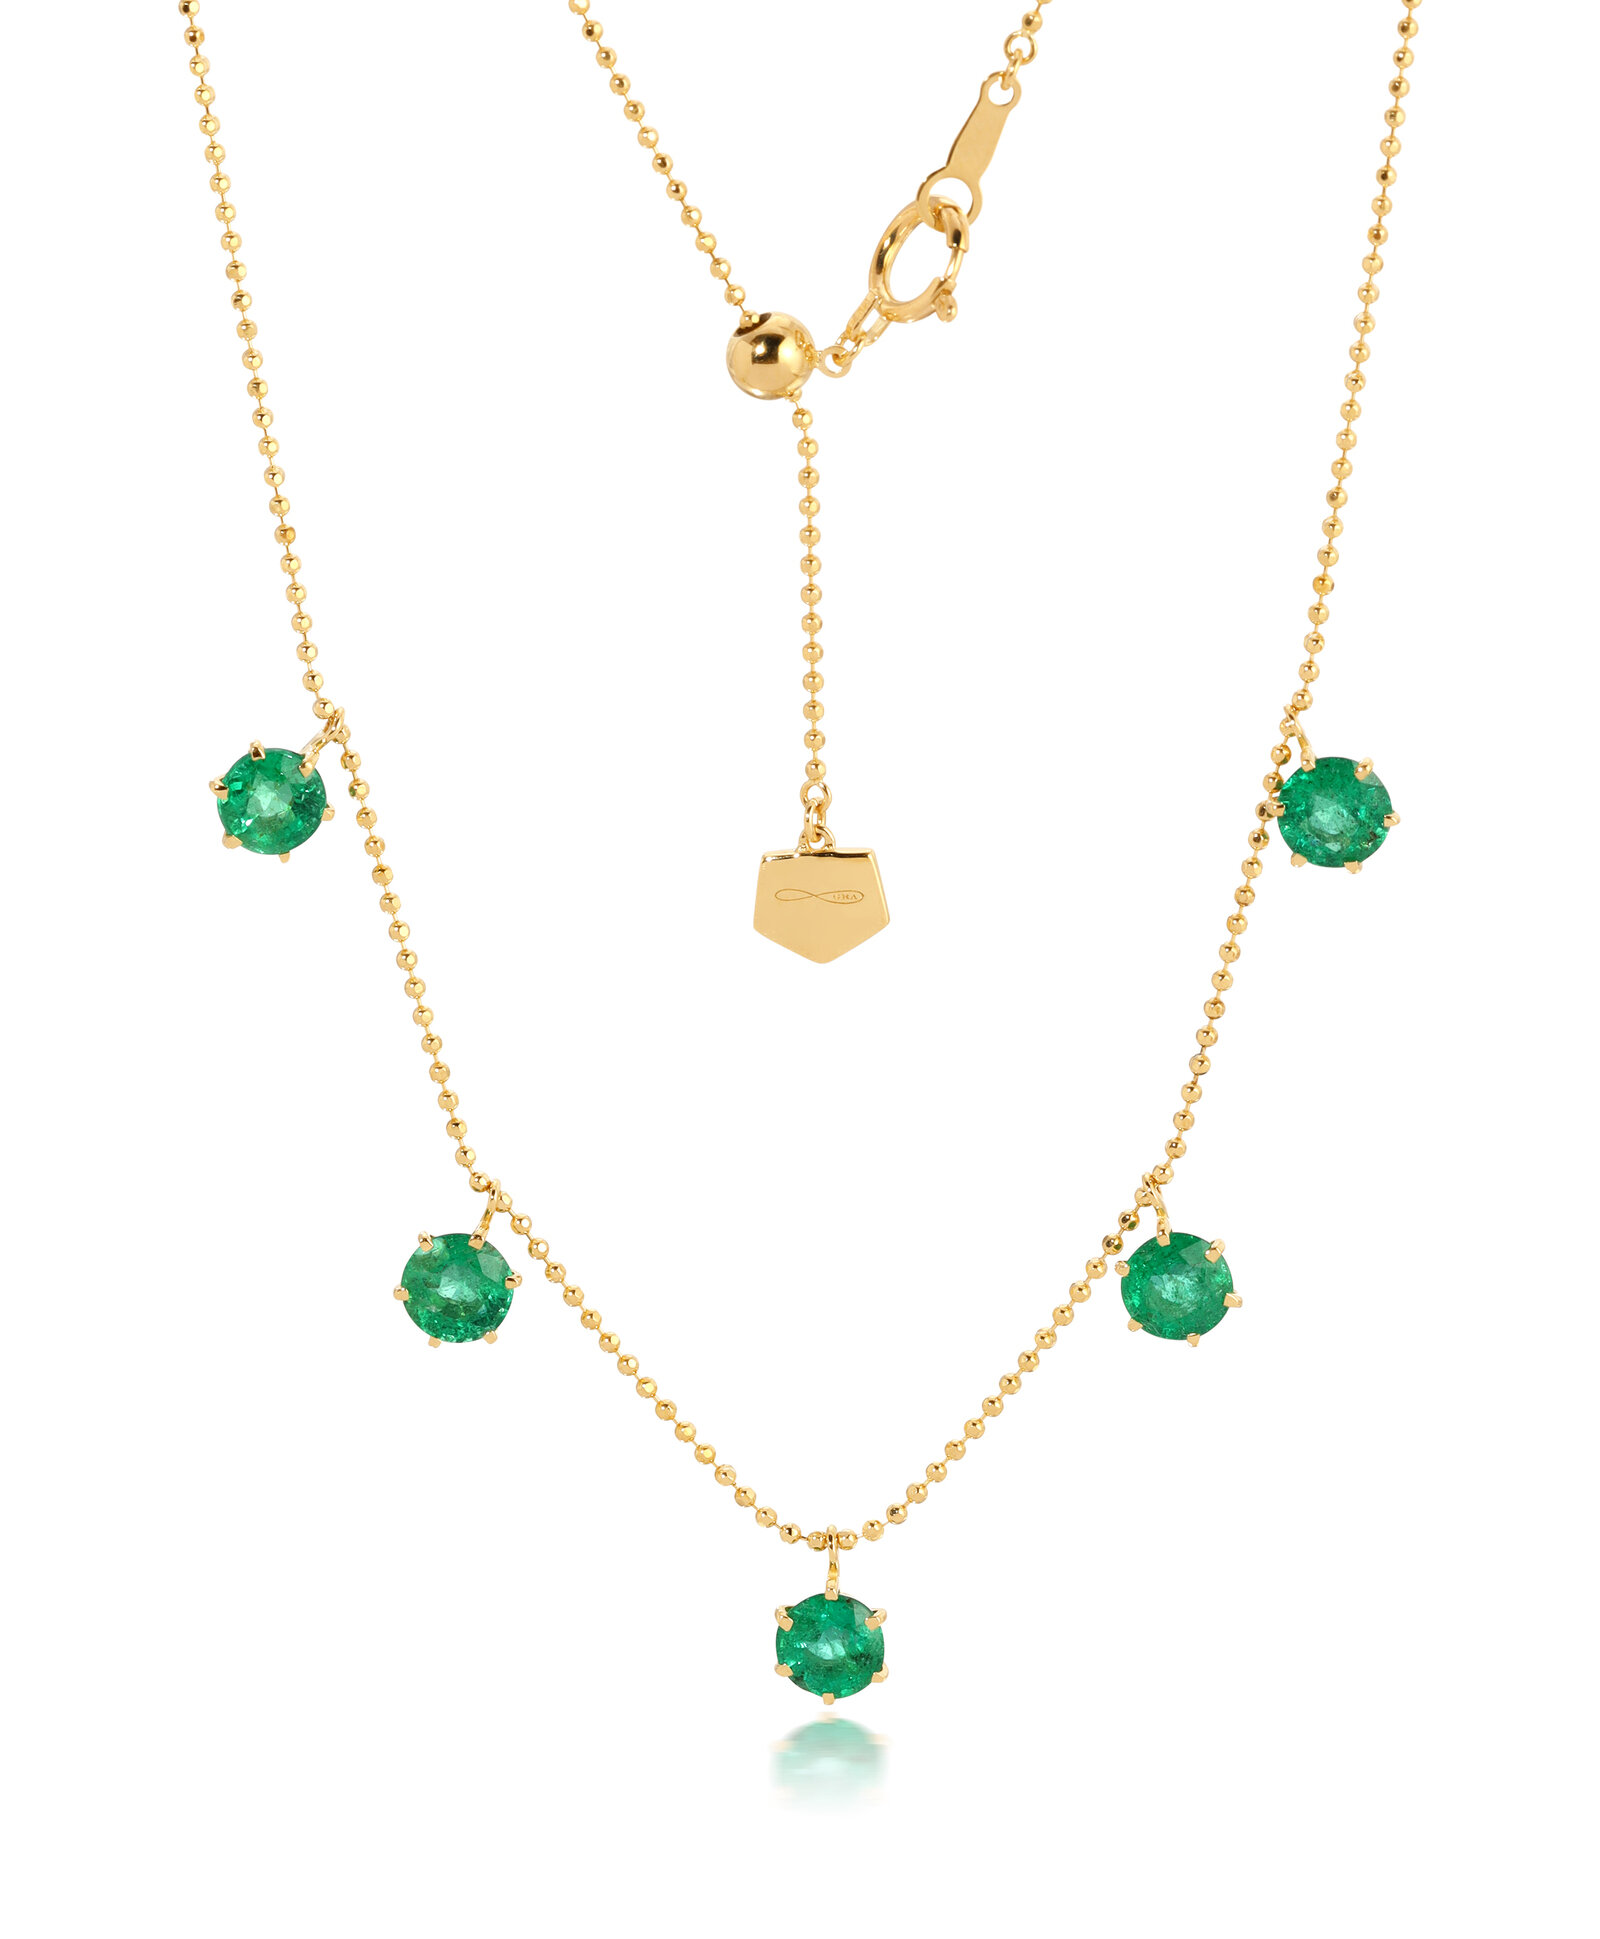 Graziela 3.5ct Emerald Floating Necklace In Green